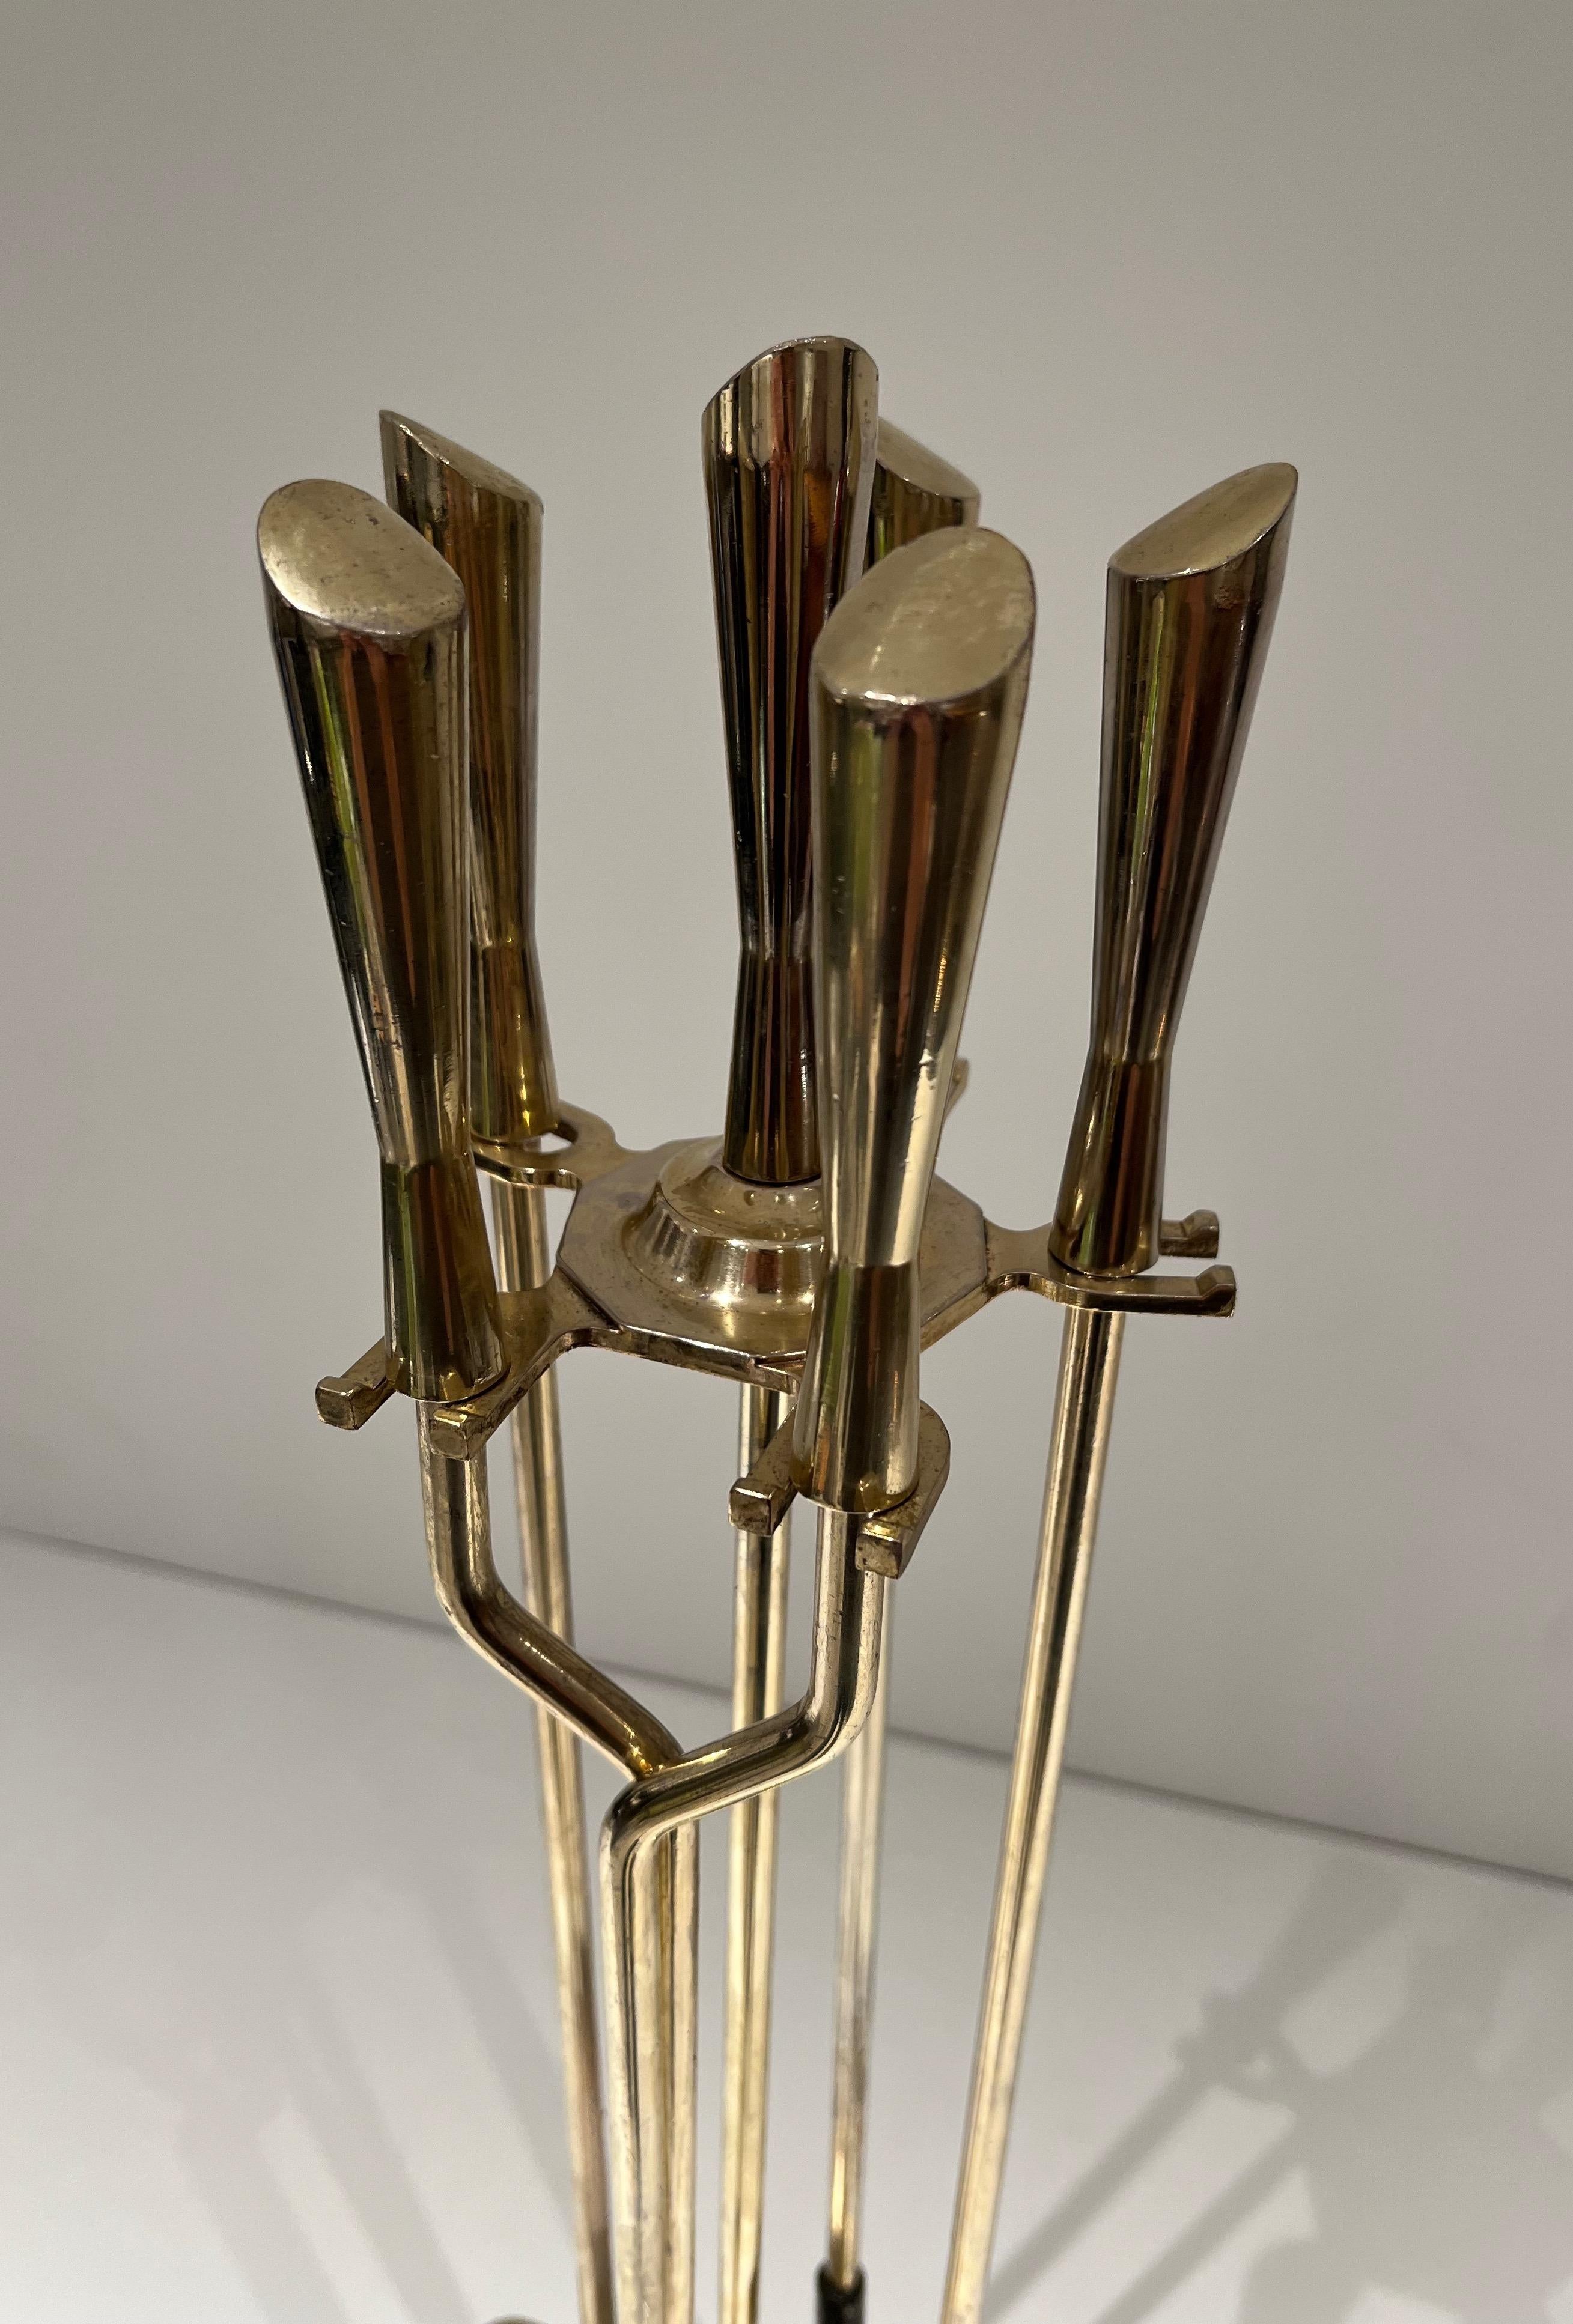 Modernist Brass Fireplace Tools In Good Condition For Sale In Marcq-en-Barœul, Hauts-de-France